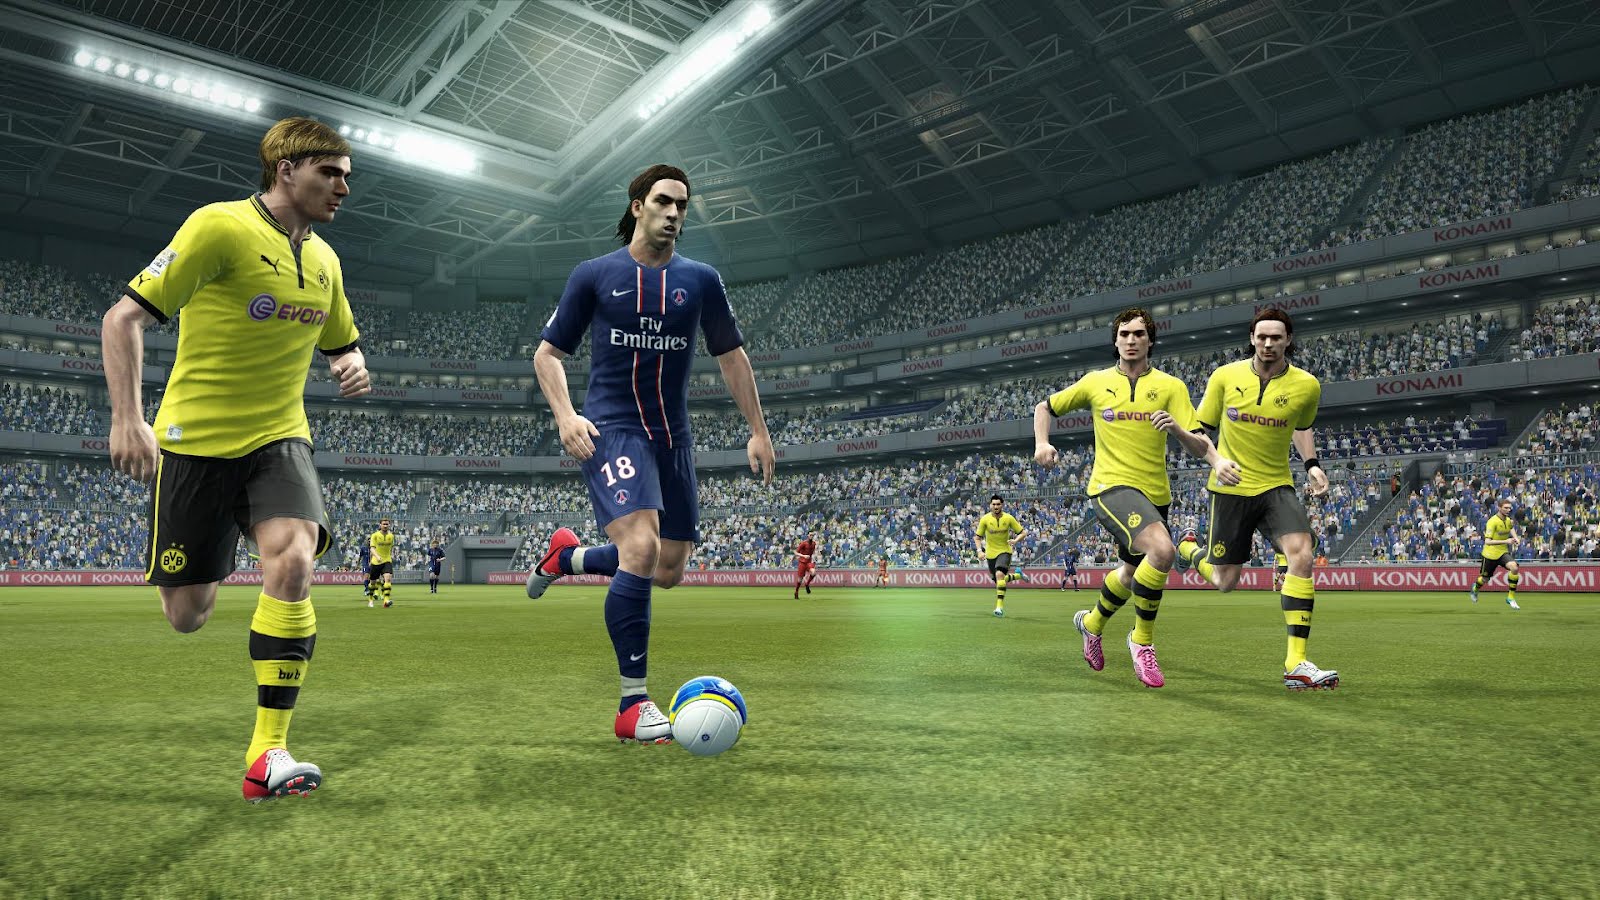 PES Pro Evolution Soccer 2013 Features